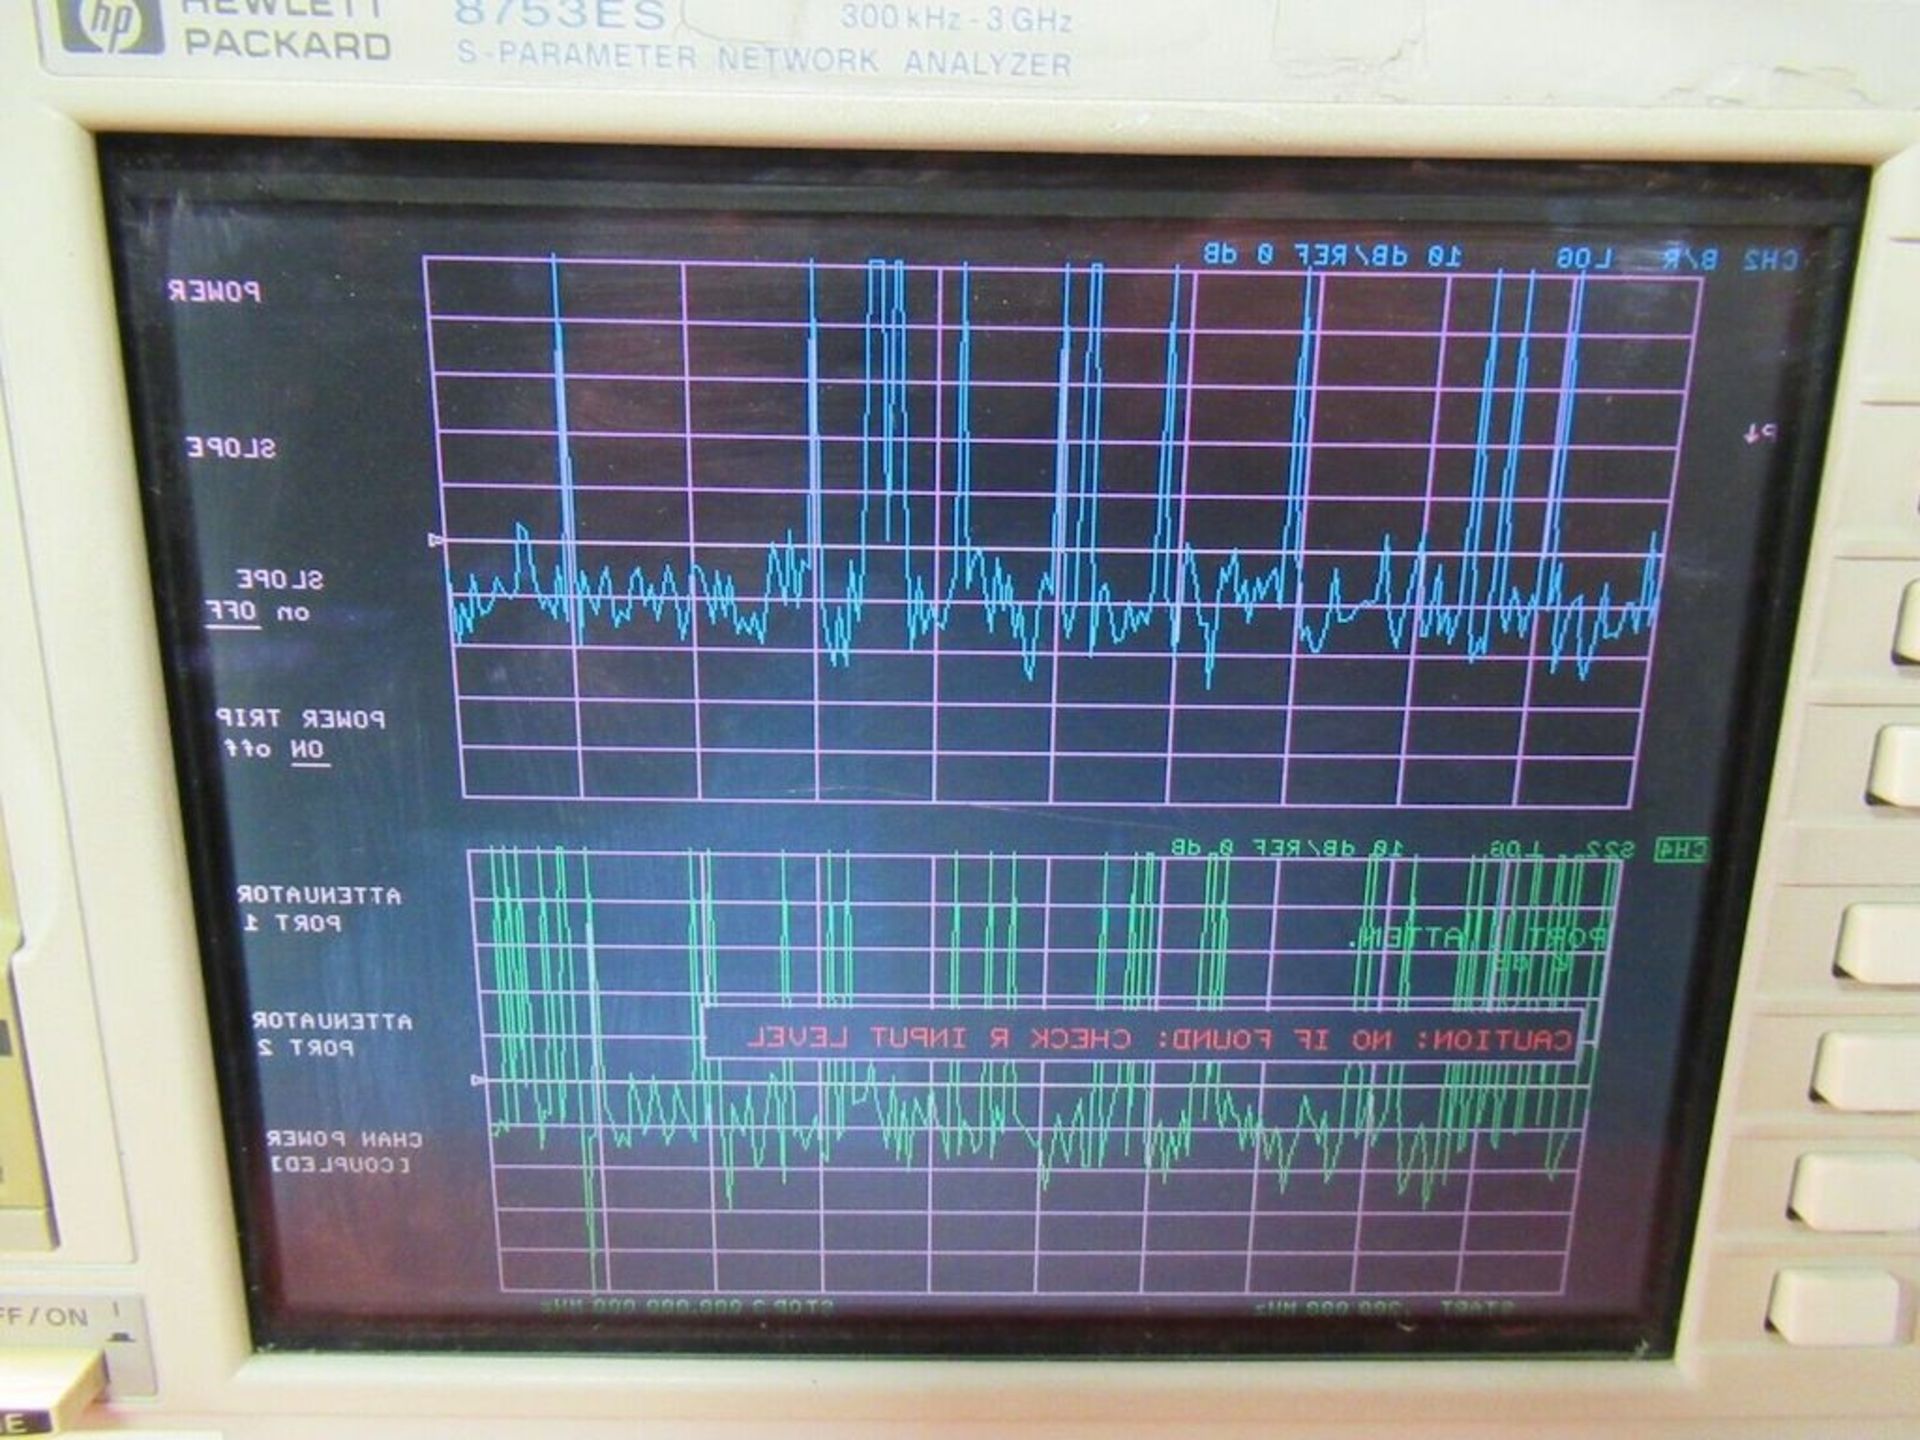 Hp 8753Es S-Parameter Network Analyzer 300Khz - 3Ghz With Cord P/N 350-000375 3 - Image 2 of 4